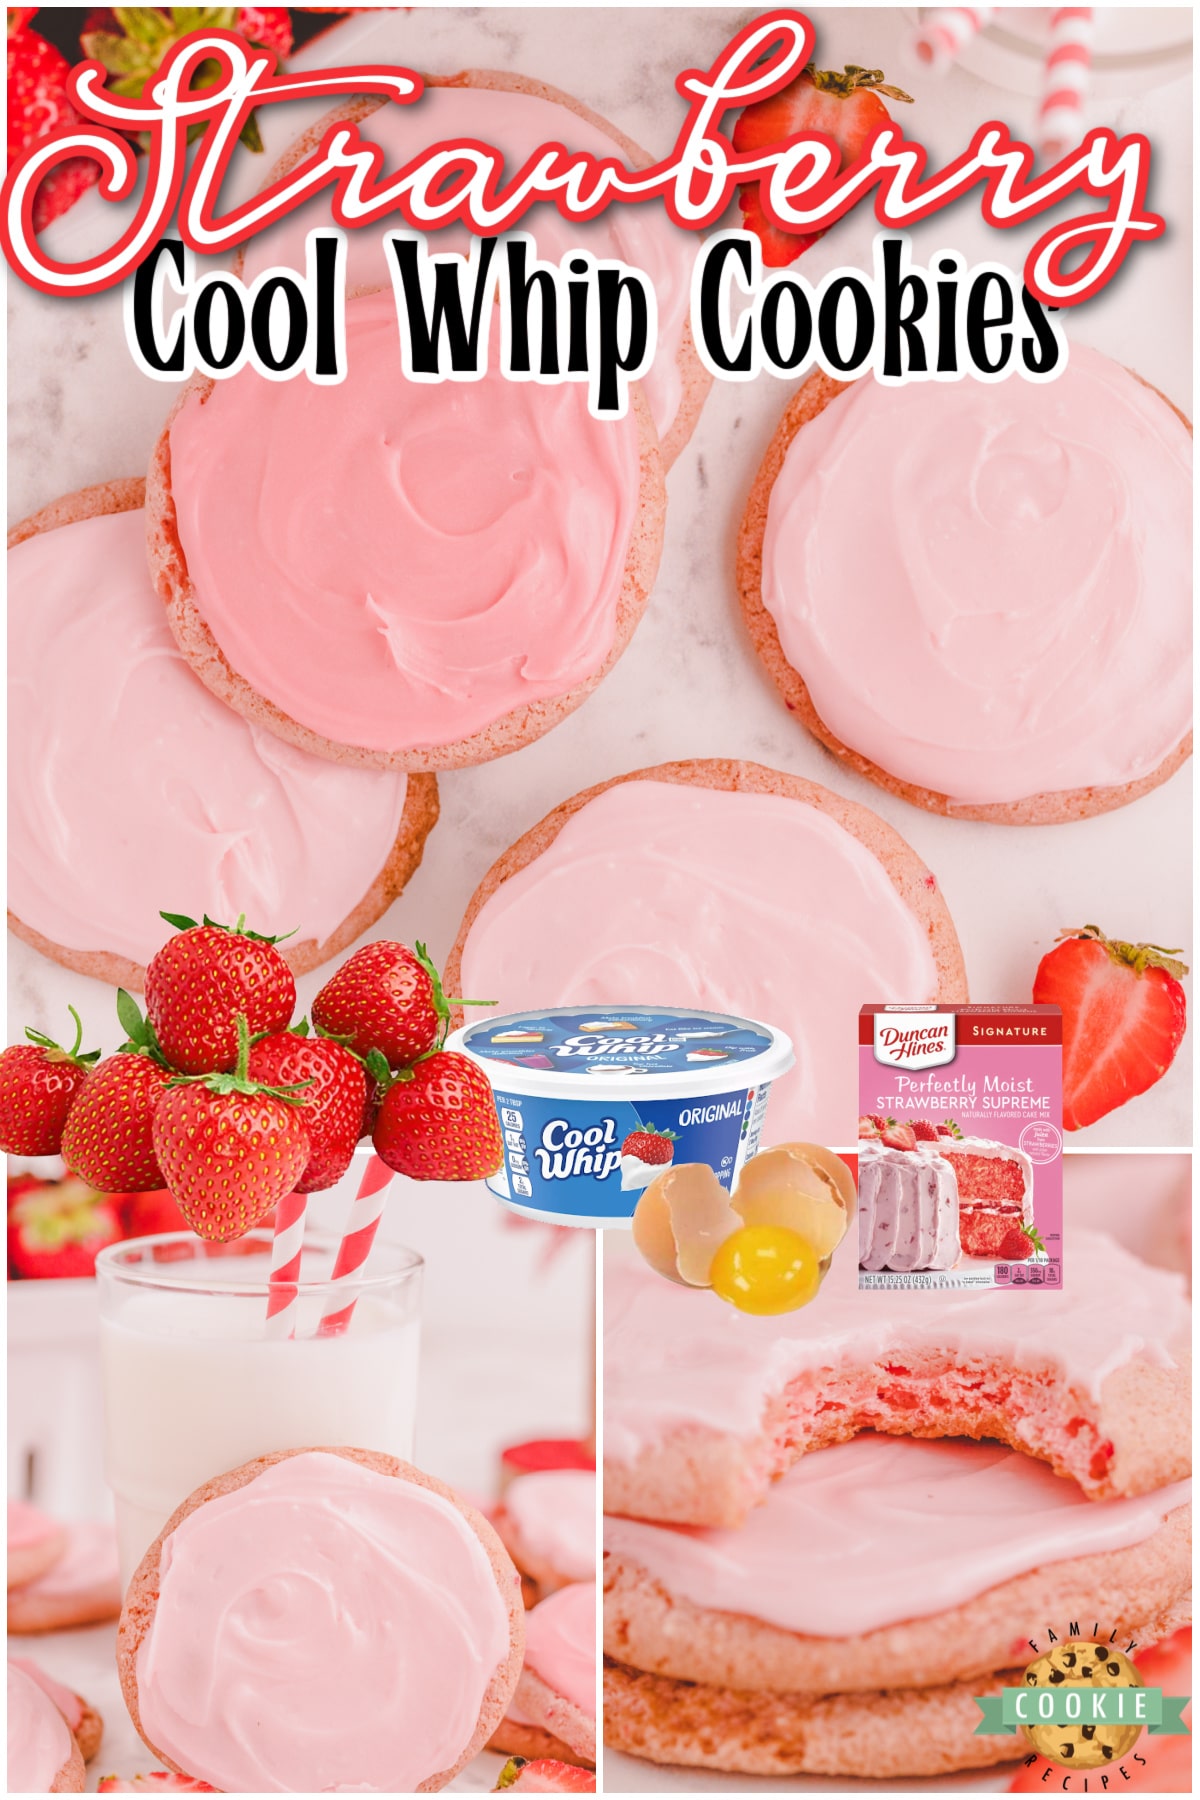 Strawberry Cool Whip Cookies made with cake mix, Cool Whip and 1 egg! Simple cake mix cookie recipe with lovely strawberry flavor that everyone loves!